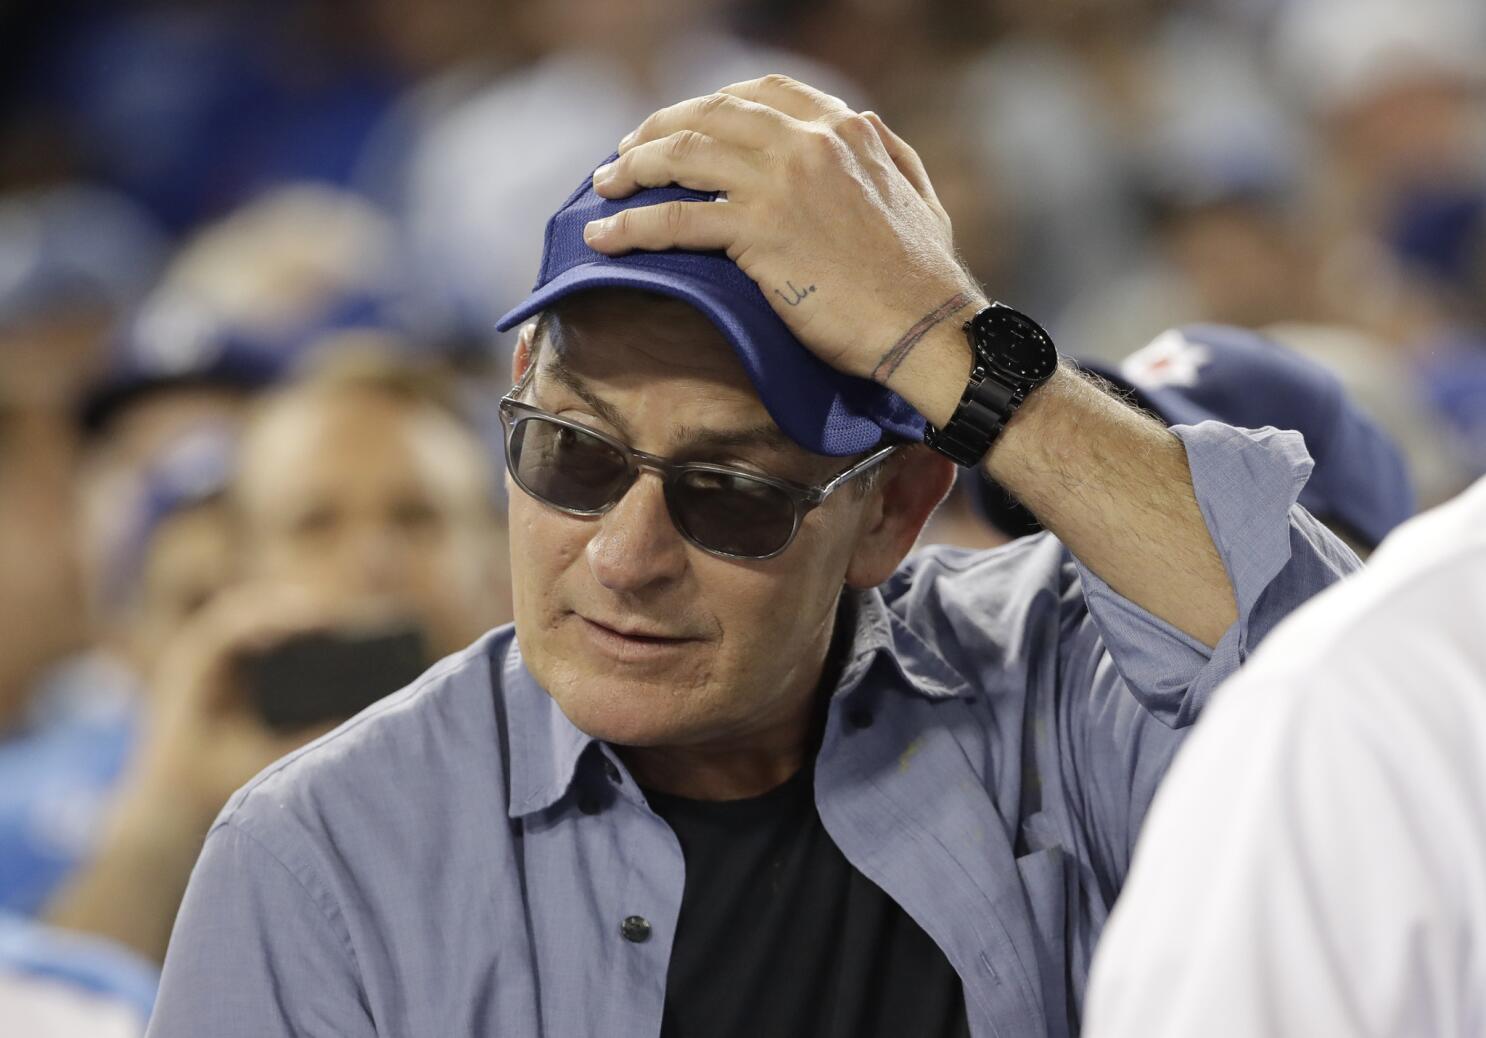 Charlie Sheen donned his Ricky Vaughn 'Major League' uniform for